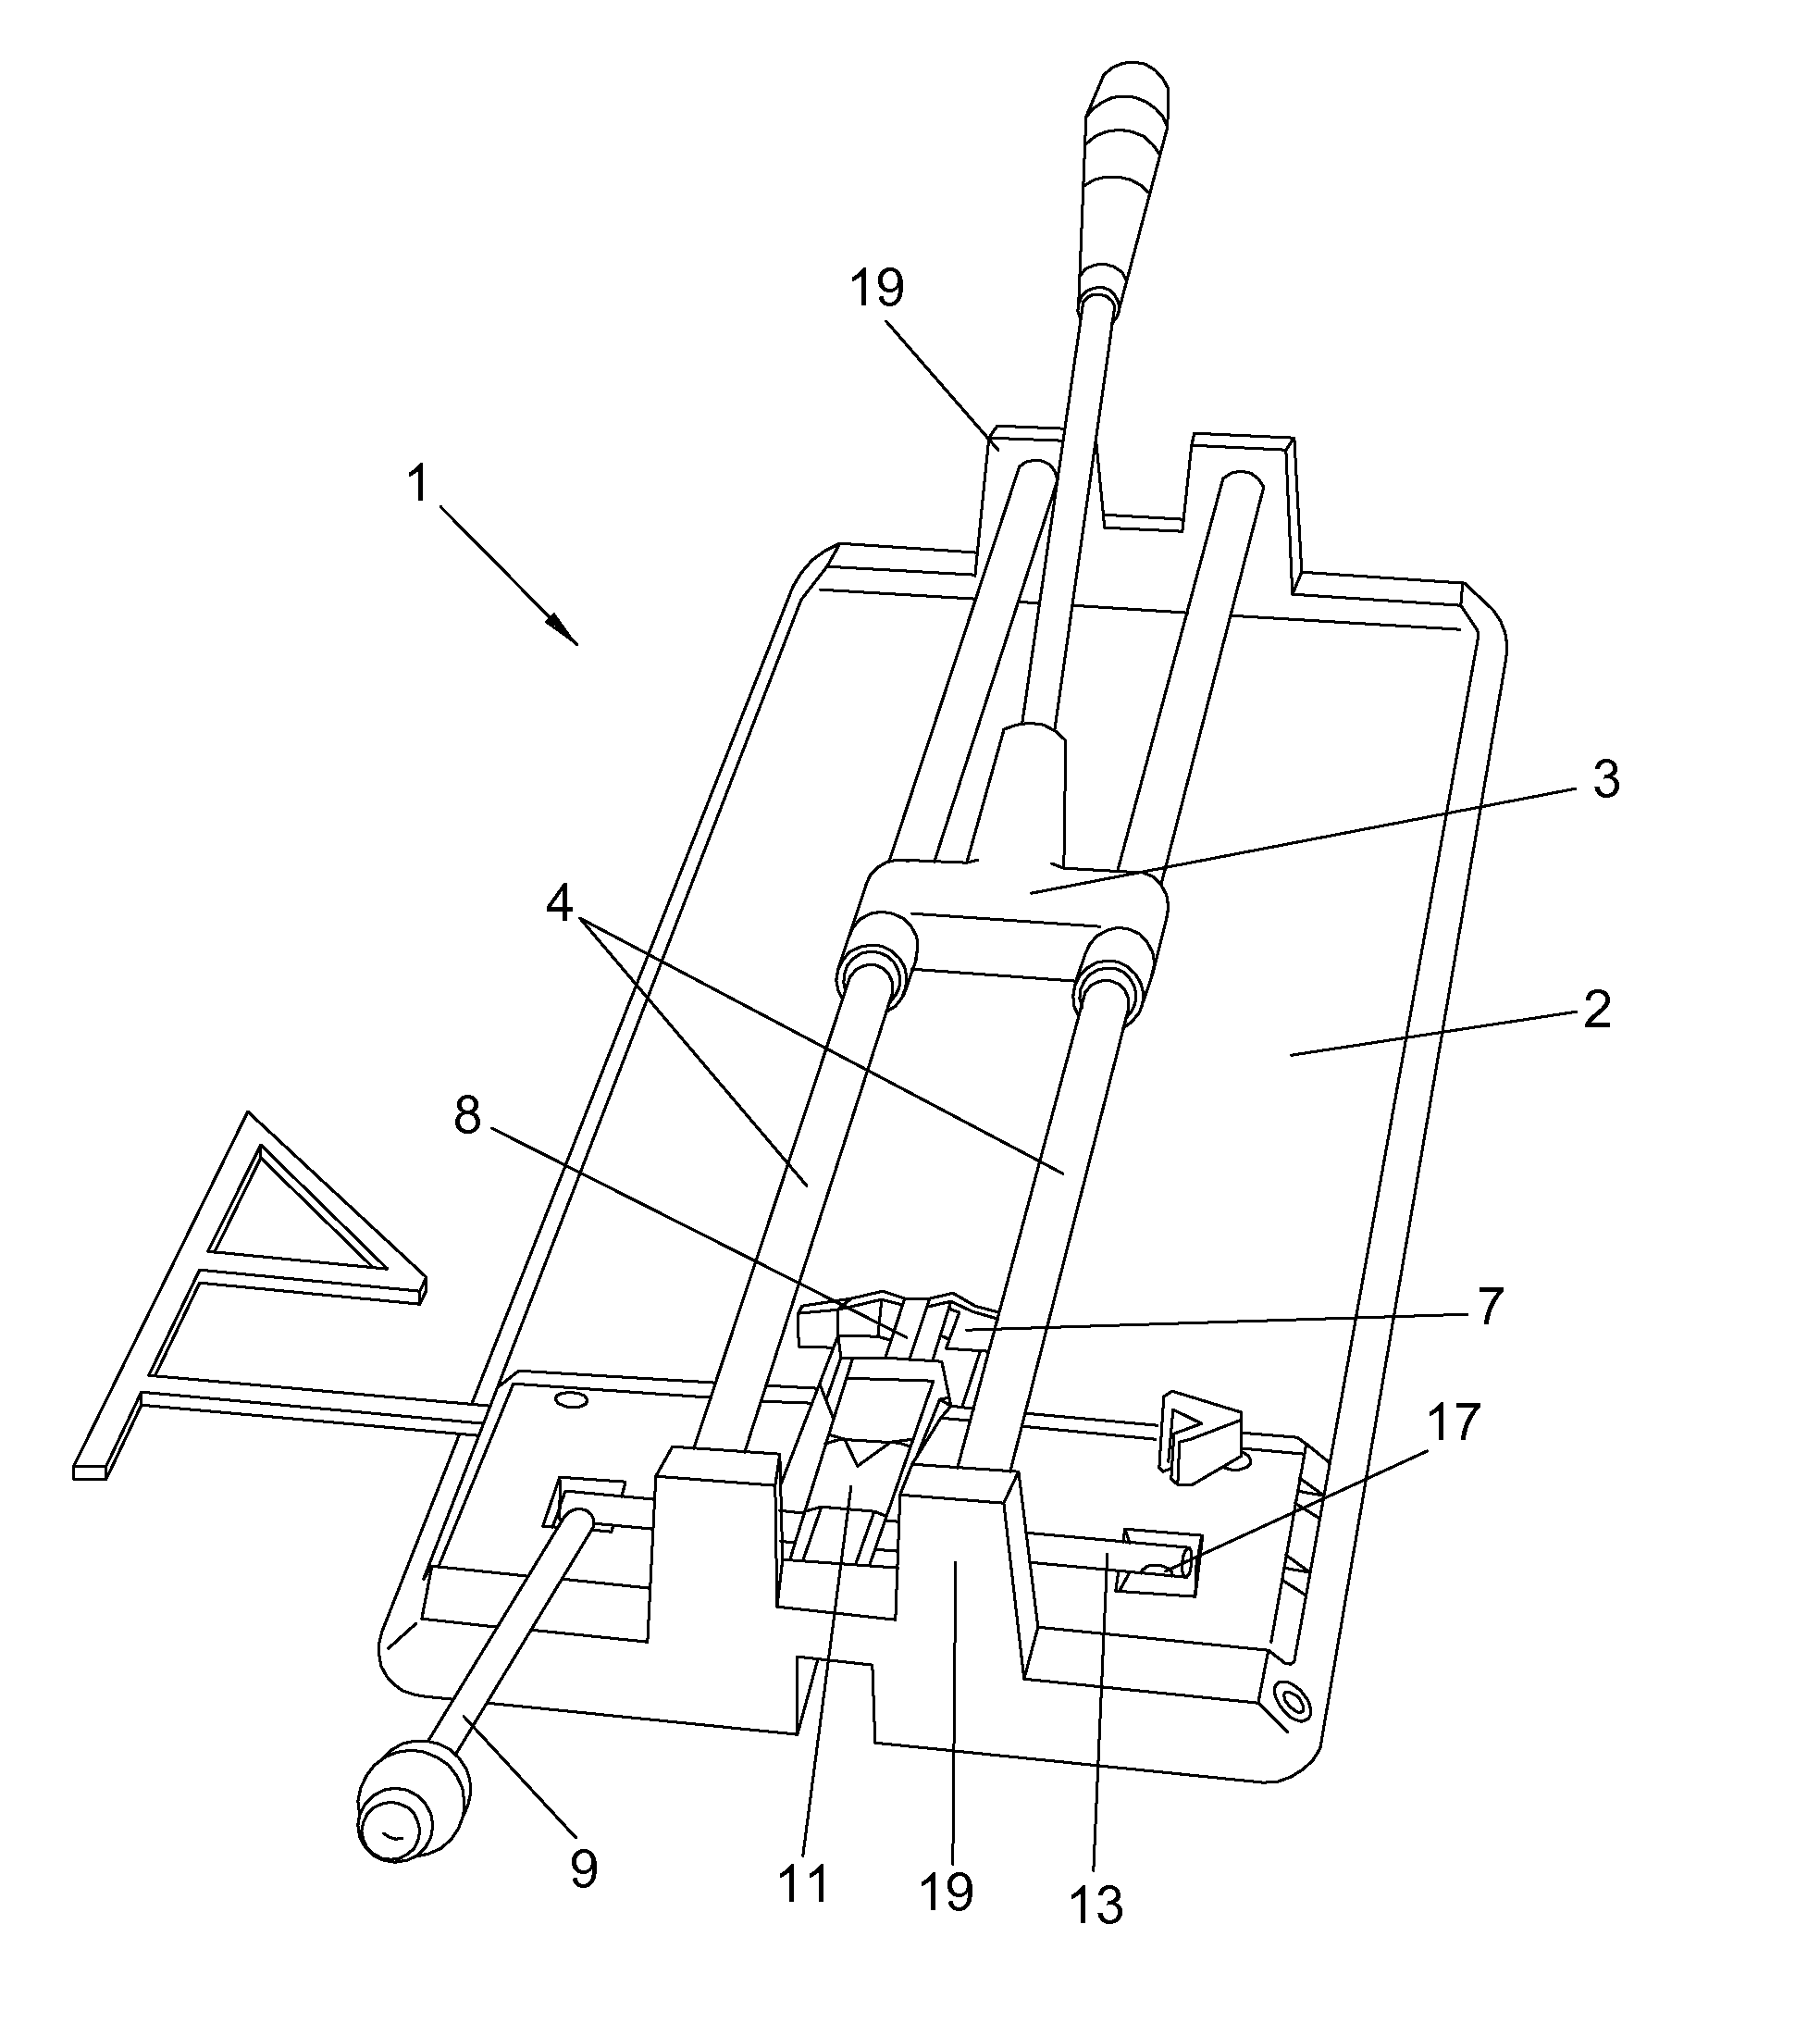 Single-point ambidextrous breakage system for ceramic cutting machines